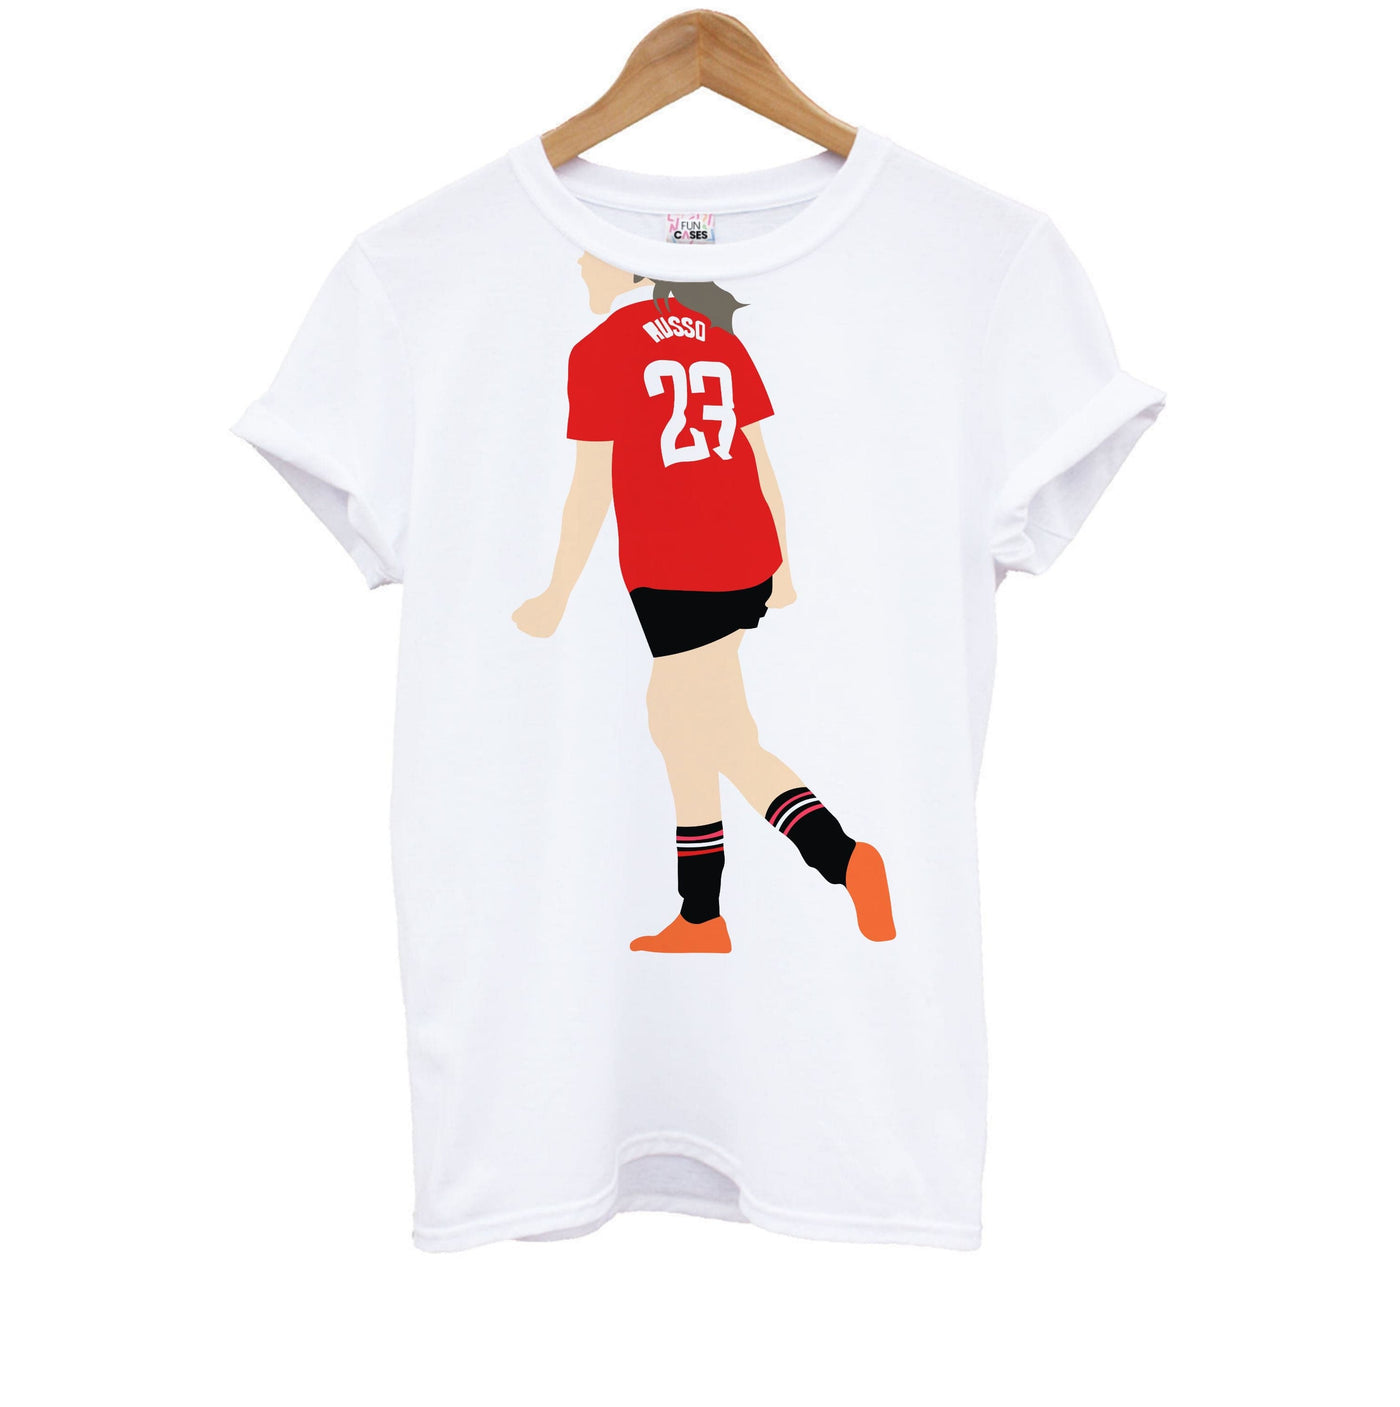 Alessia Russo - Womens World Cup Kids T-Shirt